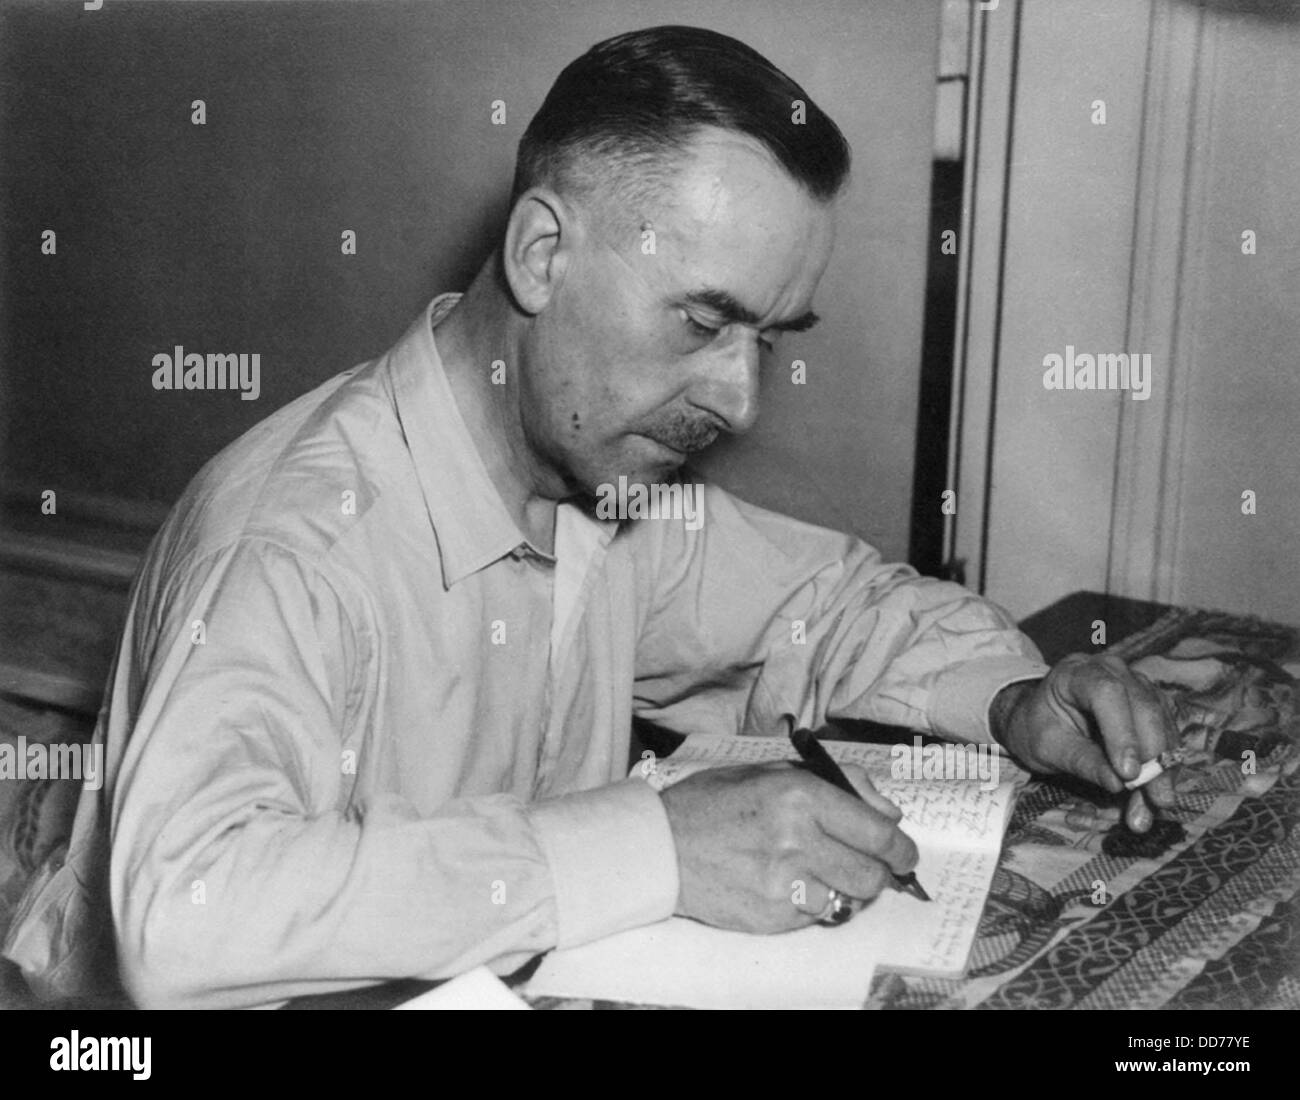 Thomas Mann, German writer and Nobel laureate, writing while holding cigarette. Ca. 1930. (BSLOC 2013 9 57) Stock Photo